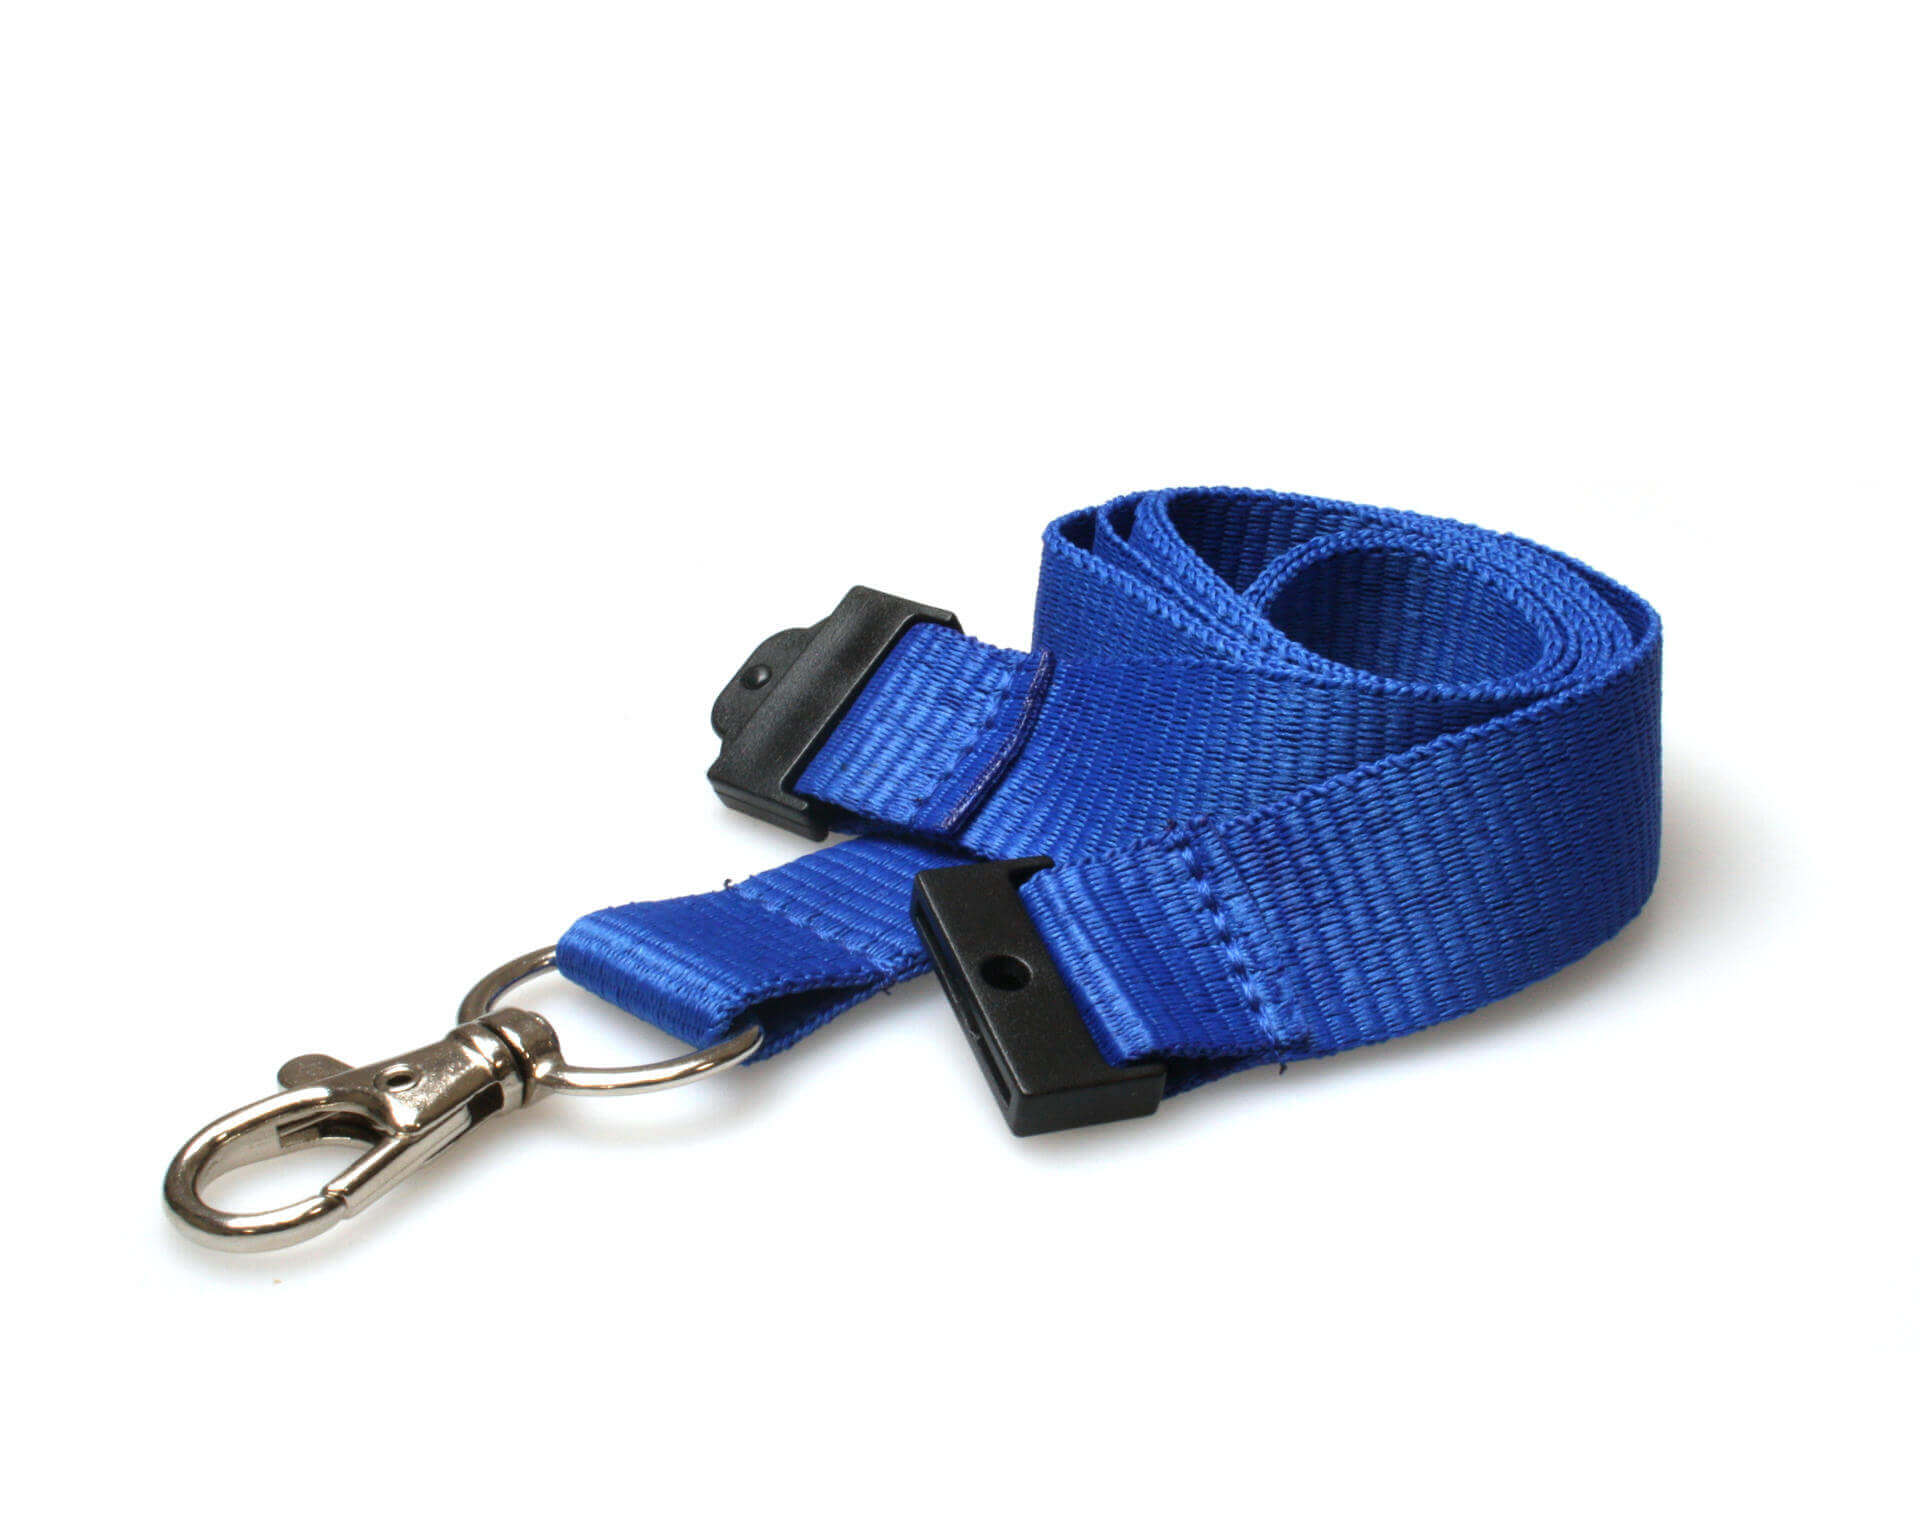 20mm Blue Lanyards (100 Pack) - Trigger Clip and Safety Breakaway